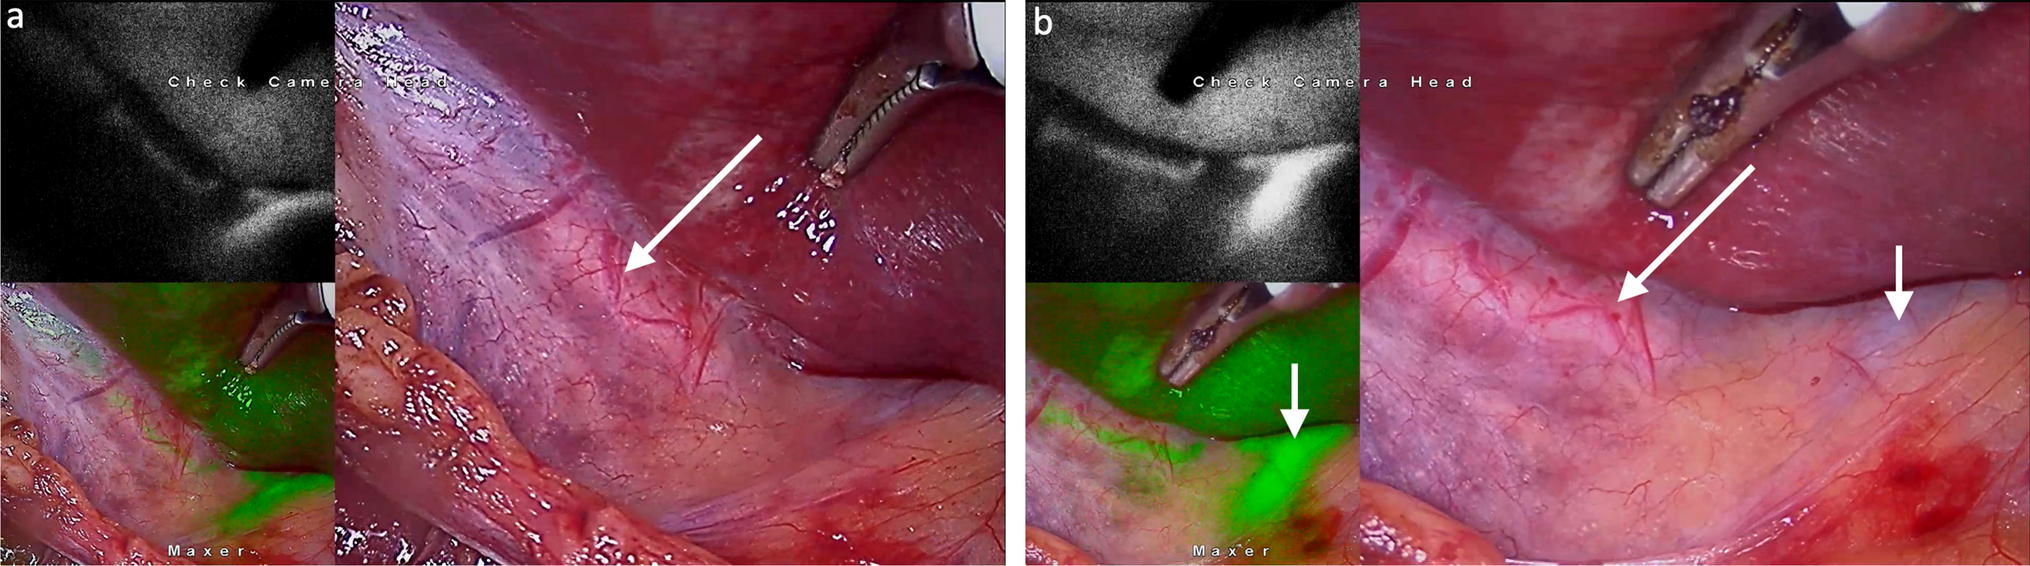 Routine Use of Indocyanine Green Fluorescence Cholangiography in Cholecystectomy at Marginal Cost and High Dividends: Subvesical Duct Identified